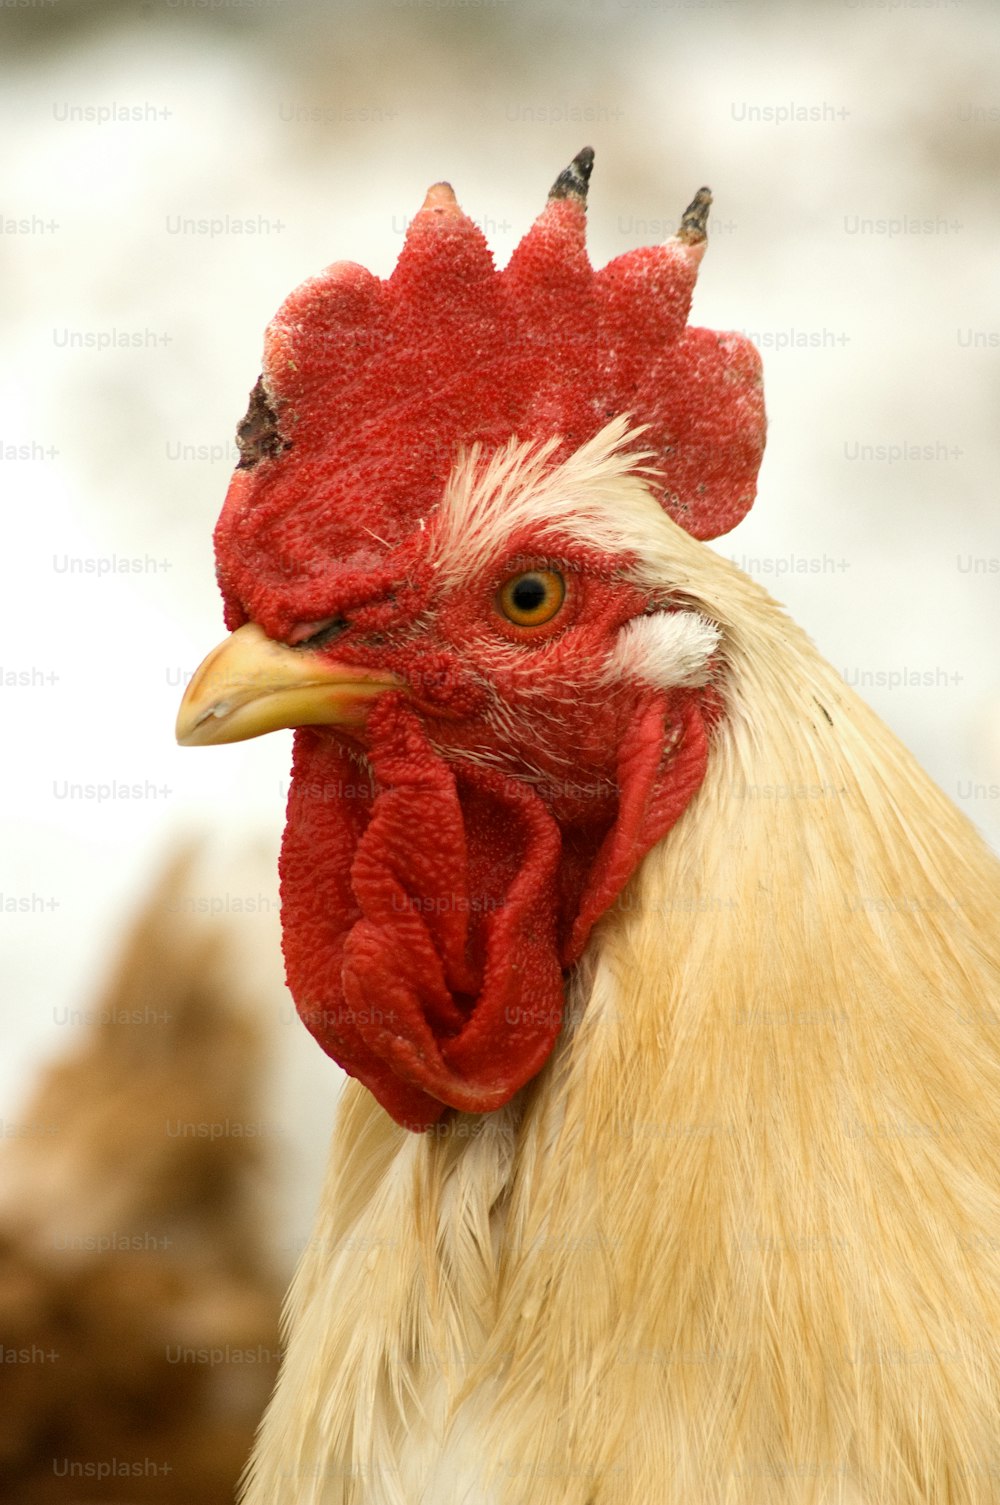 a close up of a rooster's head with a blurry background